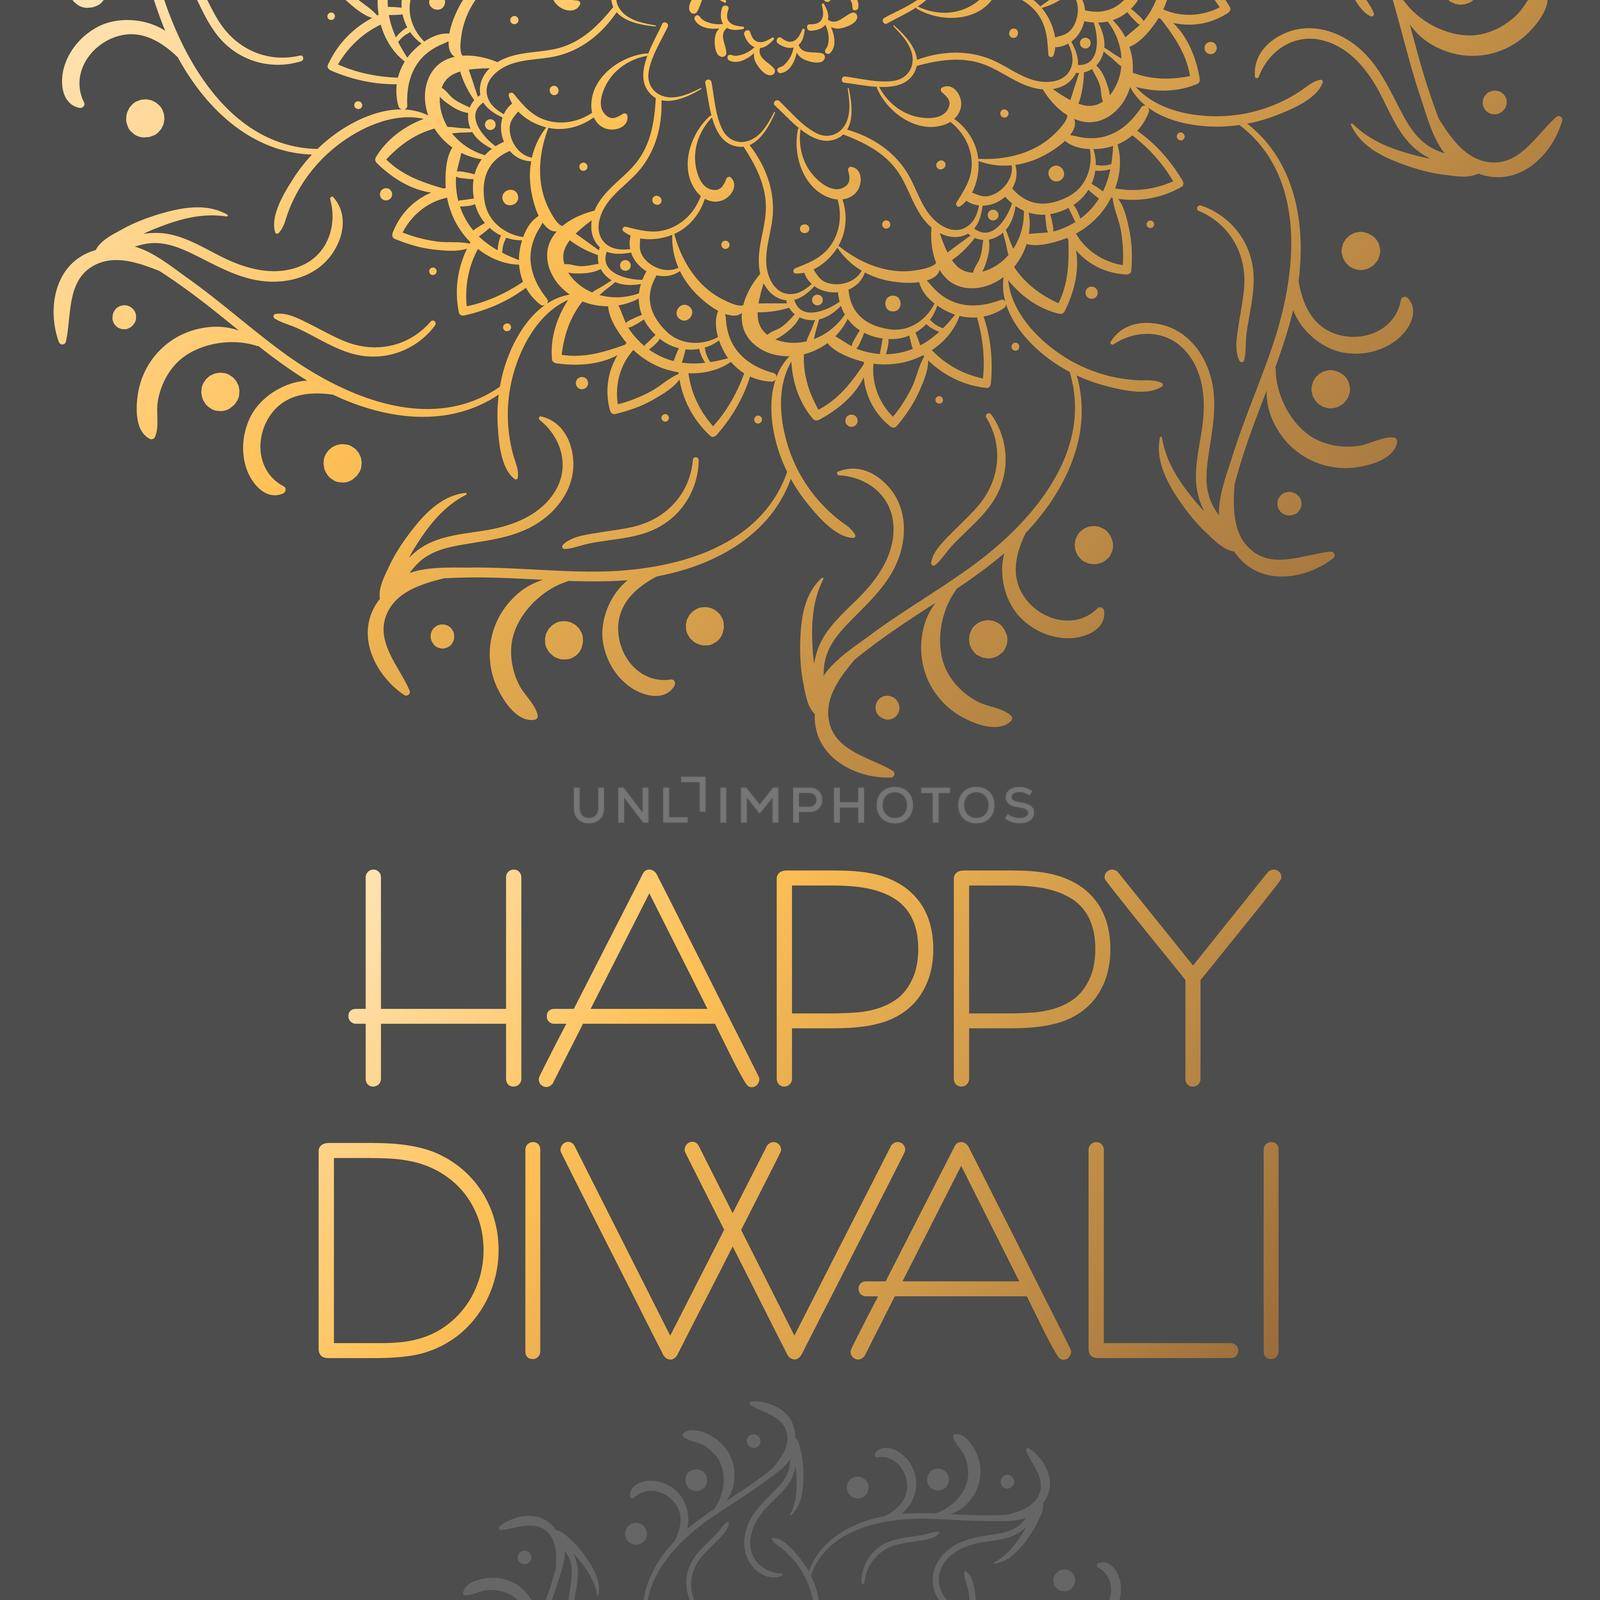 Happy Diwali. Greeting banner with lettering, grey background and mandala